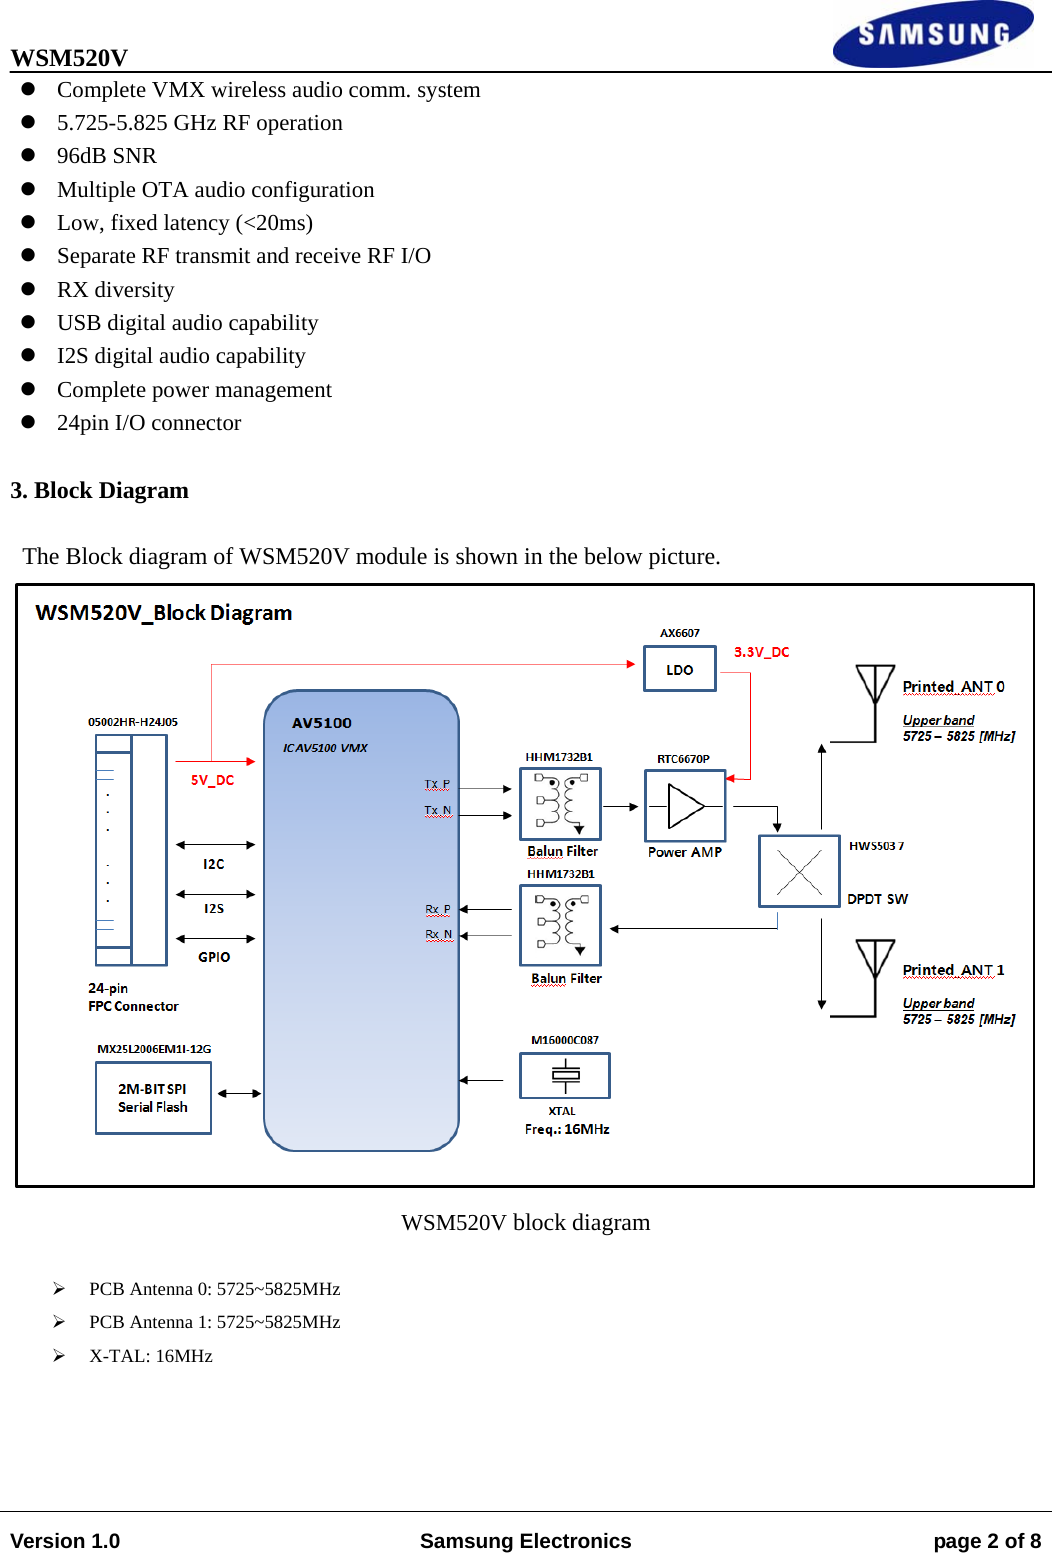 WSM520V                                                                                                                                Version 1.0  Samsung Electronics  page 2 of 8    Complete VMX wireless audio comm. system  5.725-5.825 GHz RF operation  96dB SNR  Multiple OTA audio configuration  Low, fixed latency (&lt;20ms)  Separate RF transmit and receive RF I/O   RX diversity  USB digital audio capability  I2S digital audio capability  Complete power management  24pin I/O connector  3. Block Diagram    The Block diagram of WSM520V module is shown in the below picture.  WSM520V block diagram    PCB Antenna 0: 5725~5825MHz  PCB Antenna 1: 5725~5825MHz  X-TAL: 16MHz     